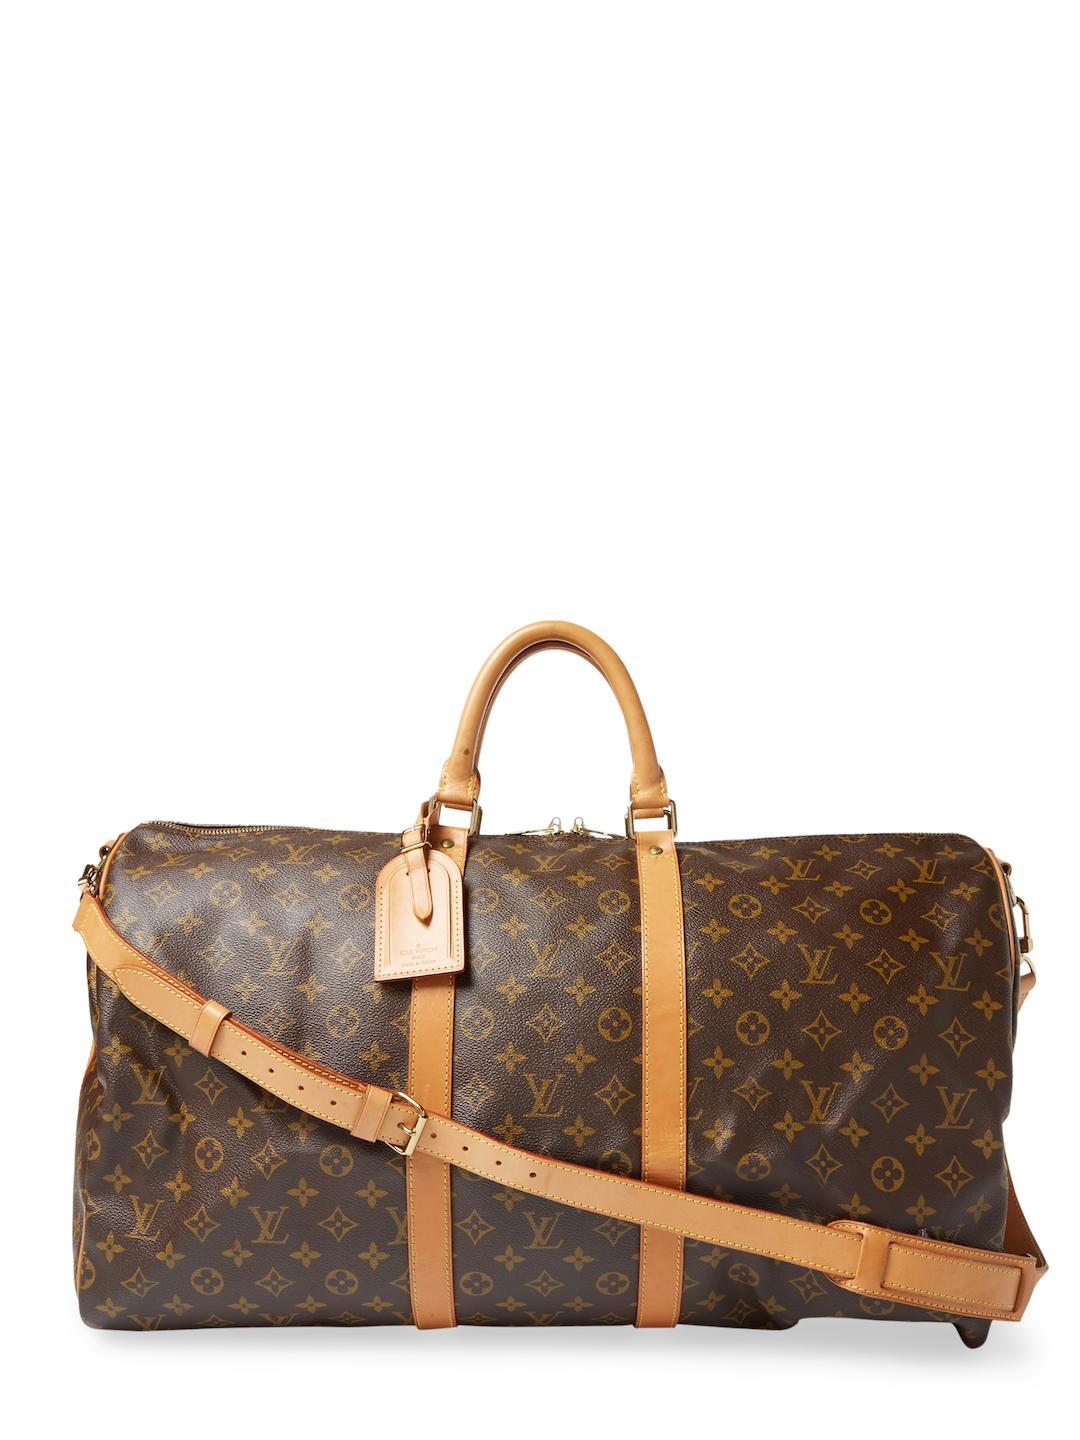 Louis Vuitton Vintage Leather Keepall 55 Bandouliere Monogram Canvas Duffel Travel Bag in Brown ...